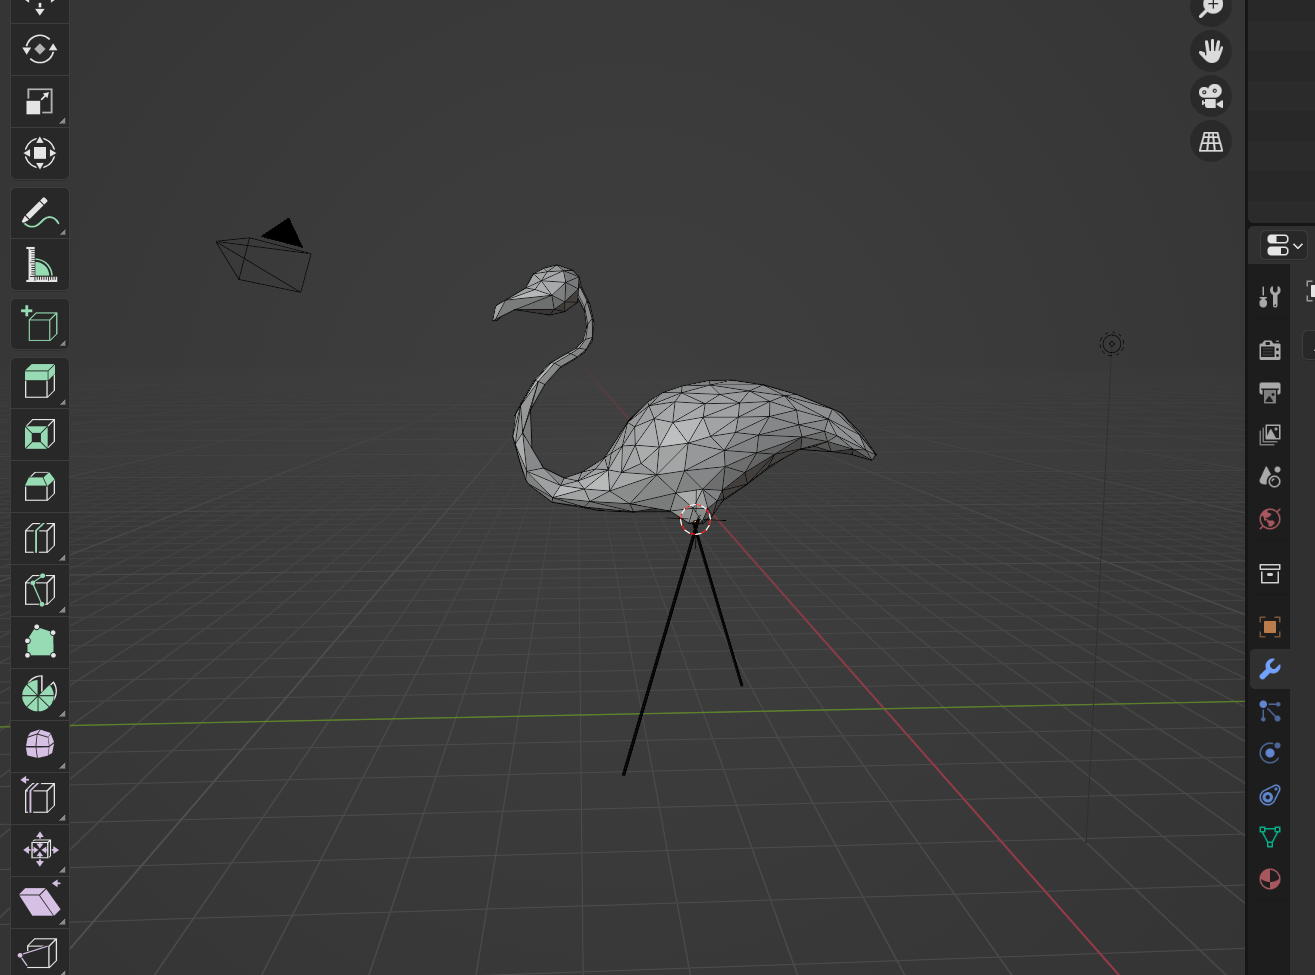 A lawn flamingo made in Blender.